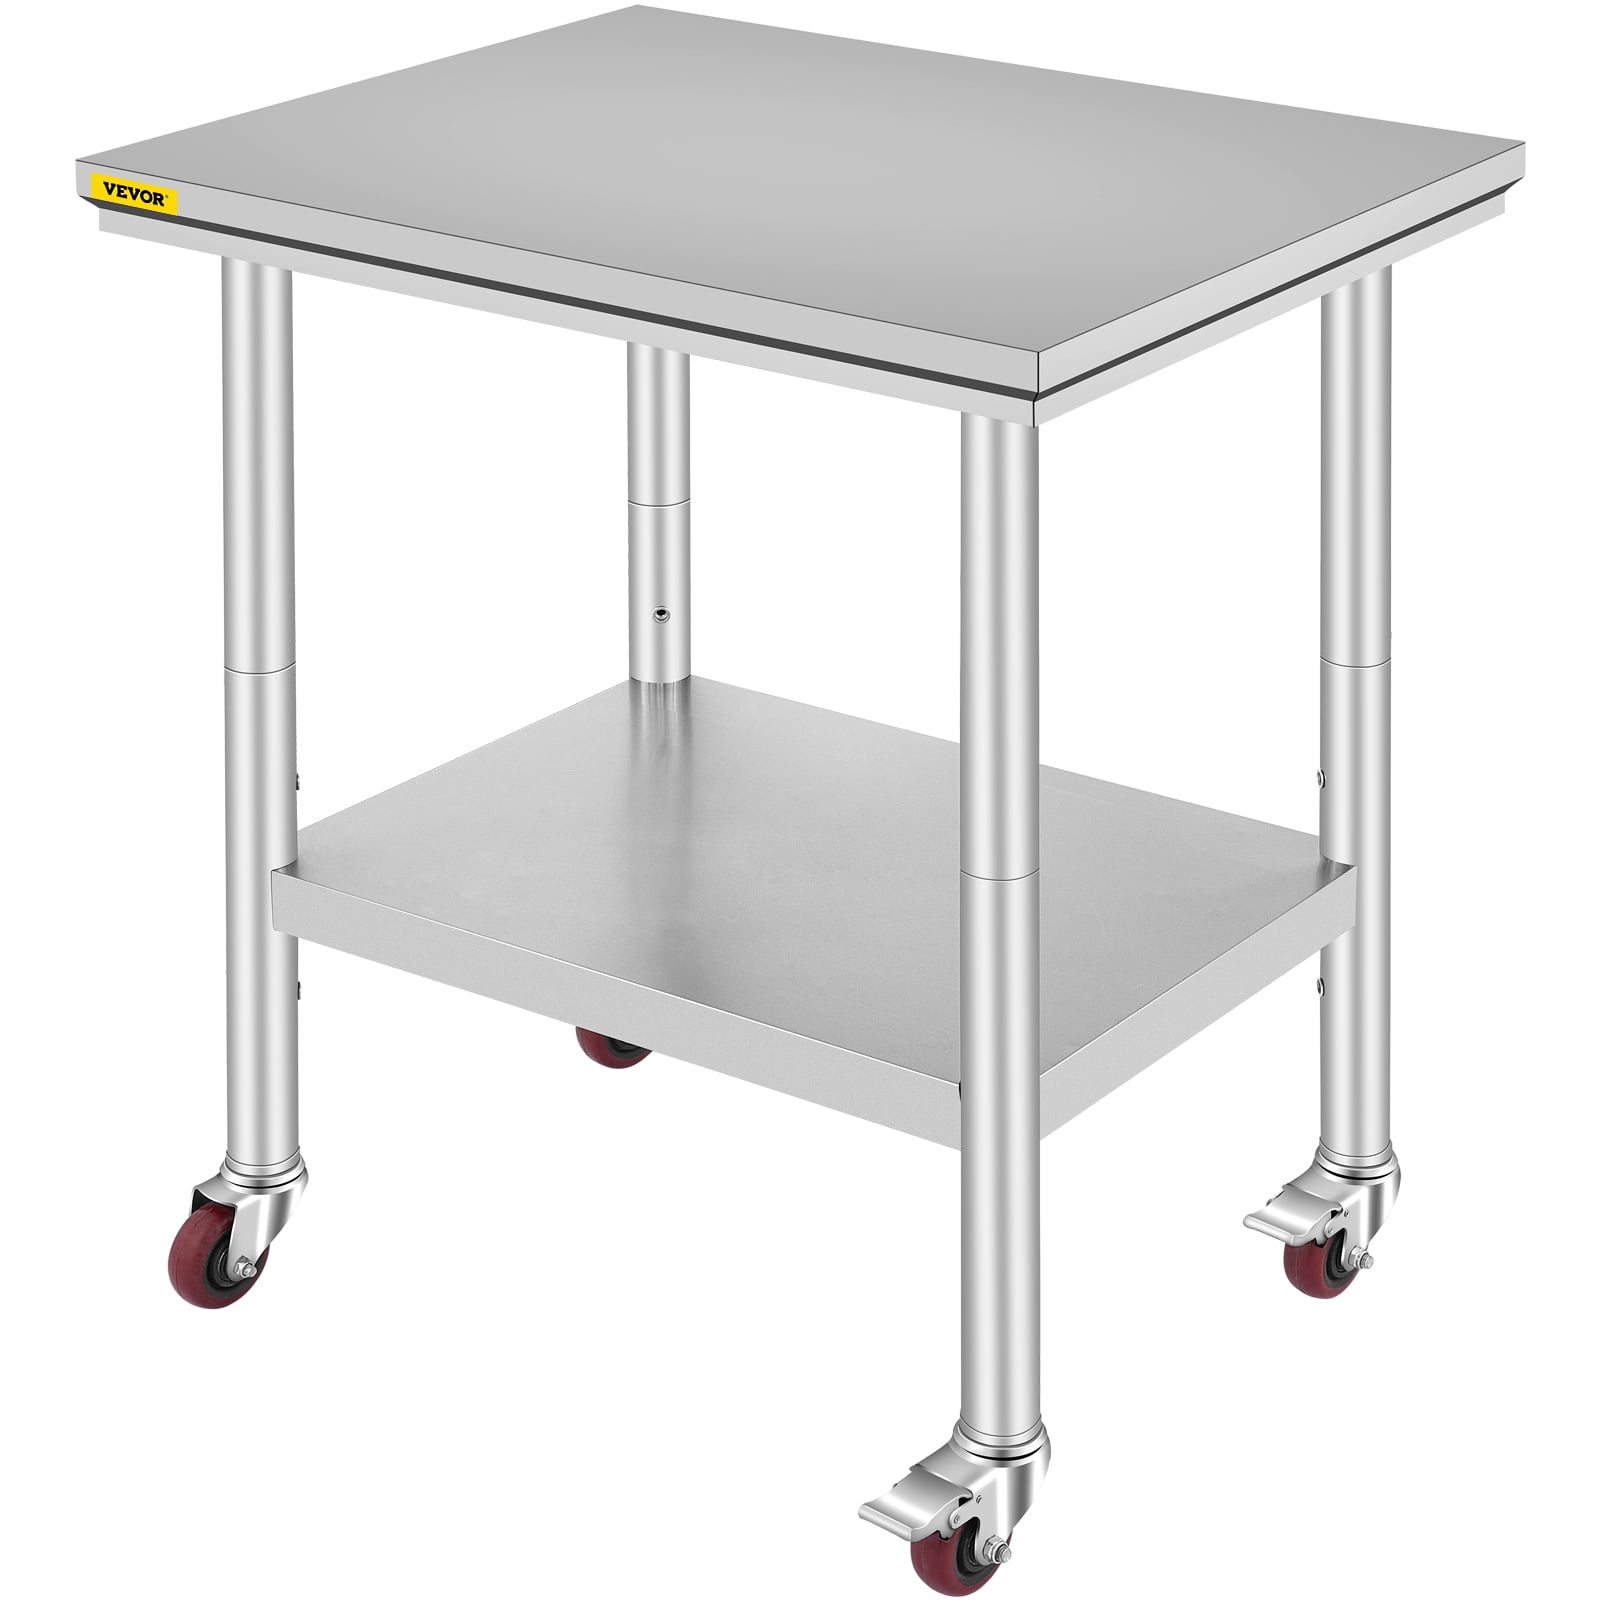 Adjustable Shelf and Caster Wheel Home and Garage for Industrial Restaurant 24 x 24 Inches Worktable with Backsplash EASE-WAY Stainless Steel Metal Table NSF for Commercial Kitchen Prep & Work 